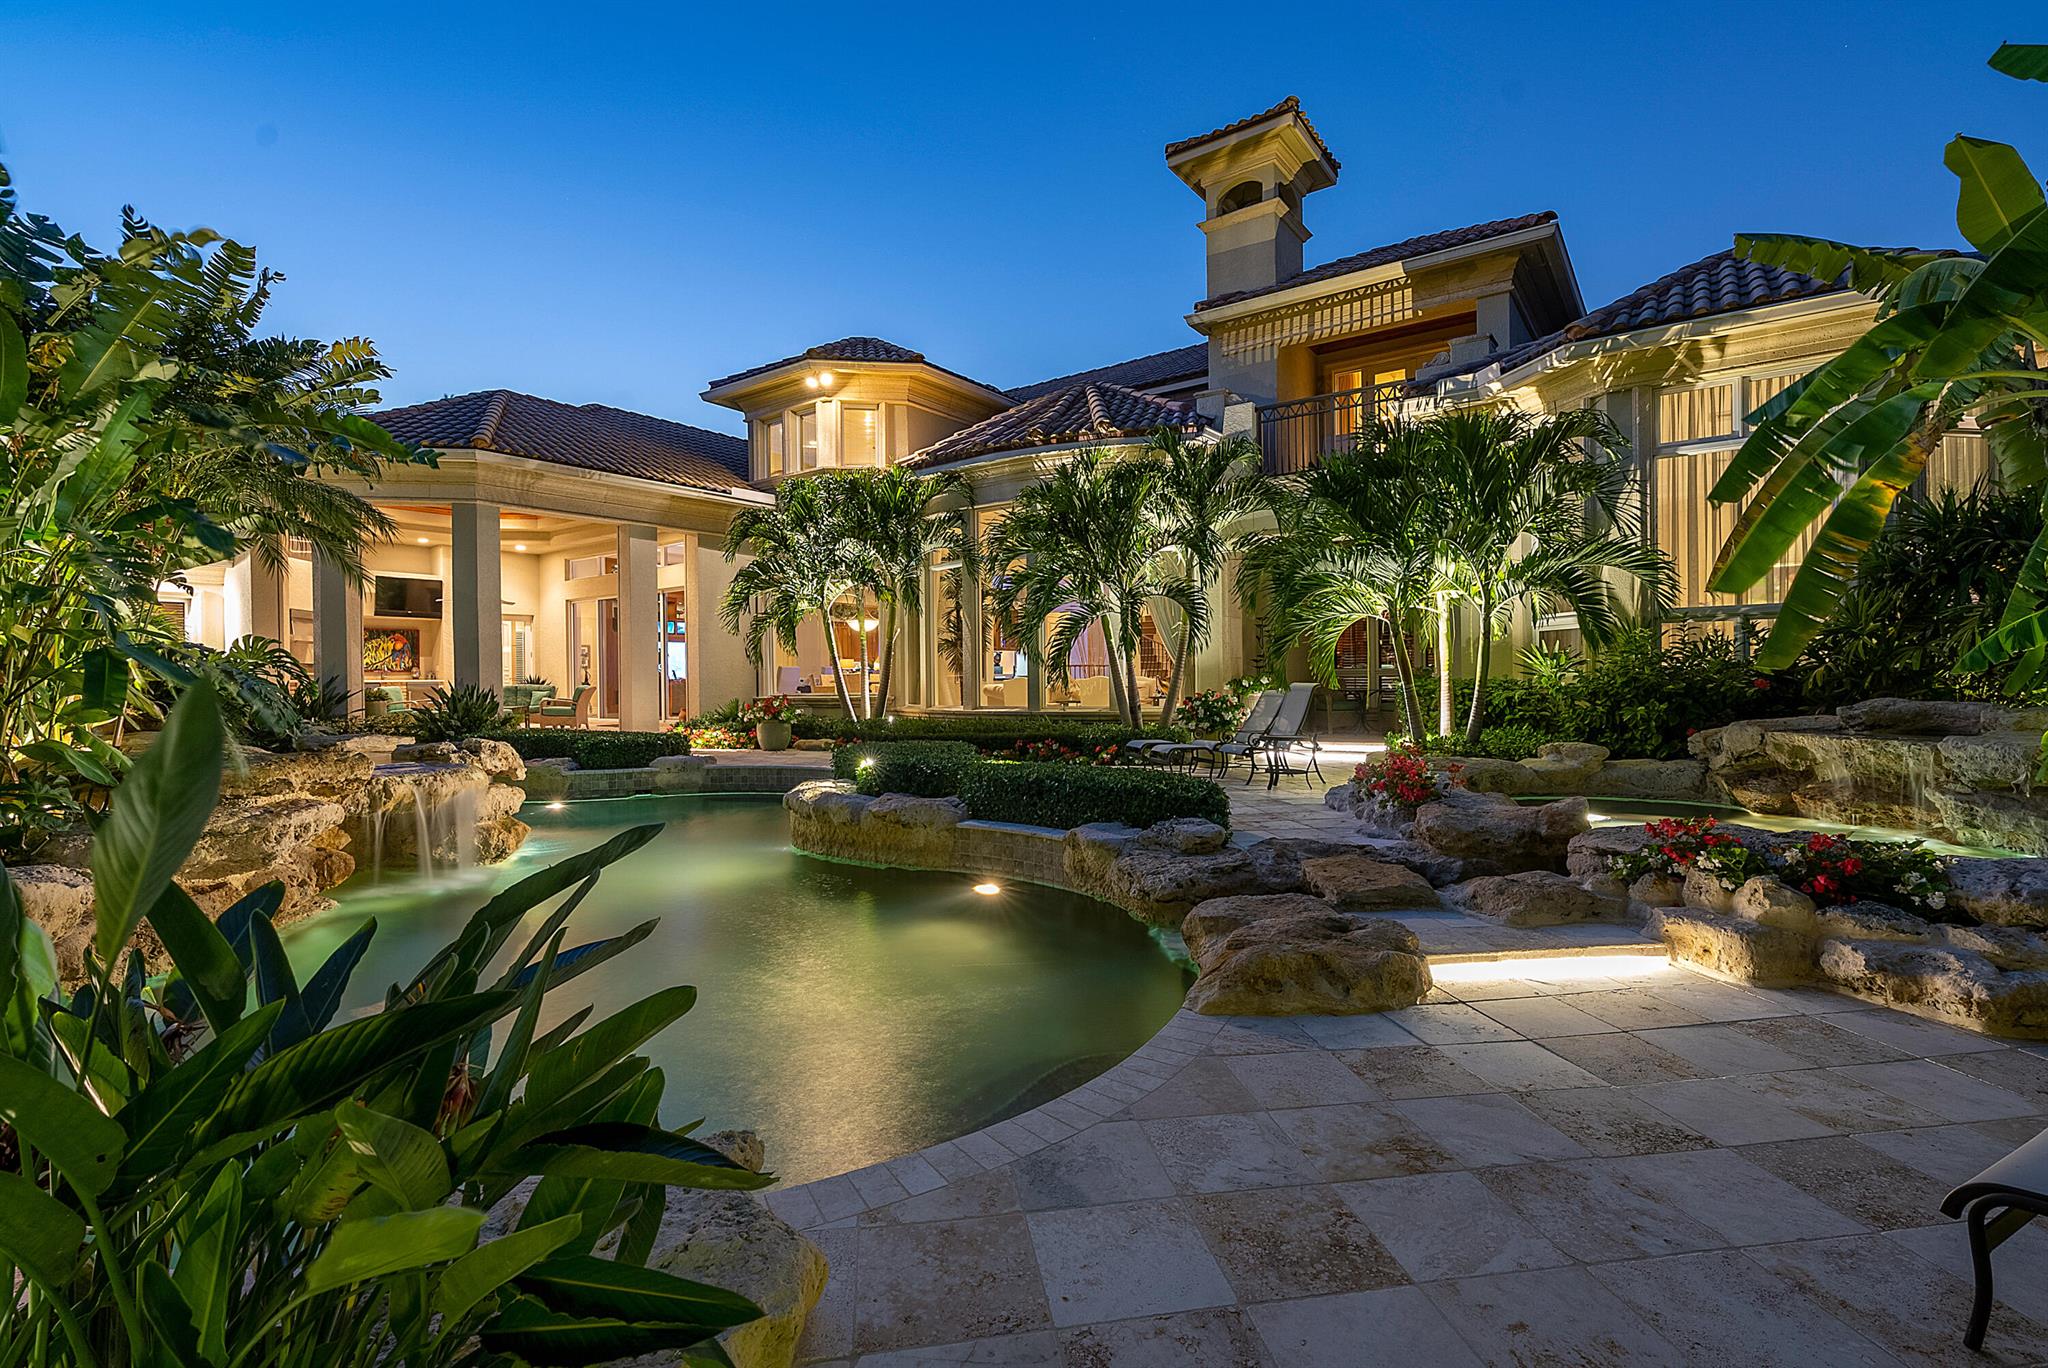 Immerse yourself in the unparalleled beauty of this exceptional waterfront estate, meticulously crafted in the prestigious Royal Palm Yacht & Country Club. With captivating waterway views, this bespoke residence offers a tropical oasis. Sprawling across an expansive 2.25 lots, encompassing over half an acre of lush greenery, and boasting an impressive 216 feet on the Buccaneer Palm Waterway, this architectural marvel designed by Randall Stofft promises an extraordinary living experience.Indulge in the enchanting ambiance of the meticulously landscaped grounds, where outdoor entertaining is elevated to an art form. Covered terraces invite you to savor the natural surroundings, while the multi-level pool and spa, thoughtfully positioned to embrace the southern exposure, provide the ultima retreat for relaxation.
Inside, curated interiors seamlessly blend with the picturesque backyard, perfectly complementing the open and flowing floor plan. The residence showcases five sumptuous bedroom suites, two offices, and a captivating library, all meticulously designed to meet the highest standards of luxury living.
Experience the epitome of luxury living in this exquisite waterfront estate, where every detail has been thoughtfully curated to provide an unparalleled lifestyle of elegance and refinement.
Buyer to pay documentary stamp taxes on the deed and title insurance. Furniture is negotiable.